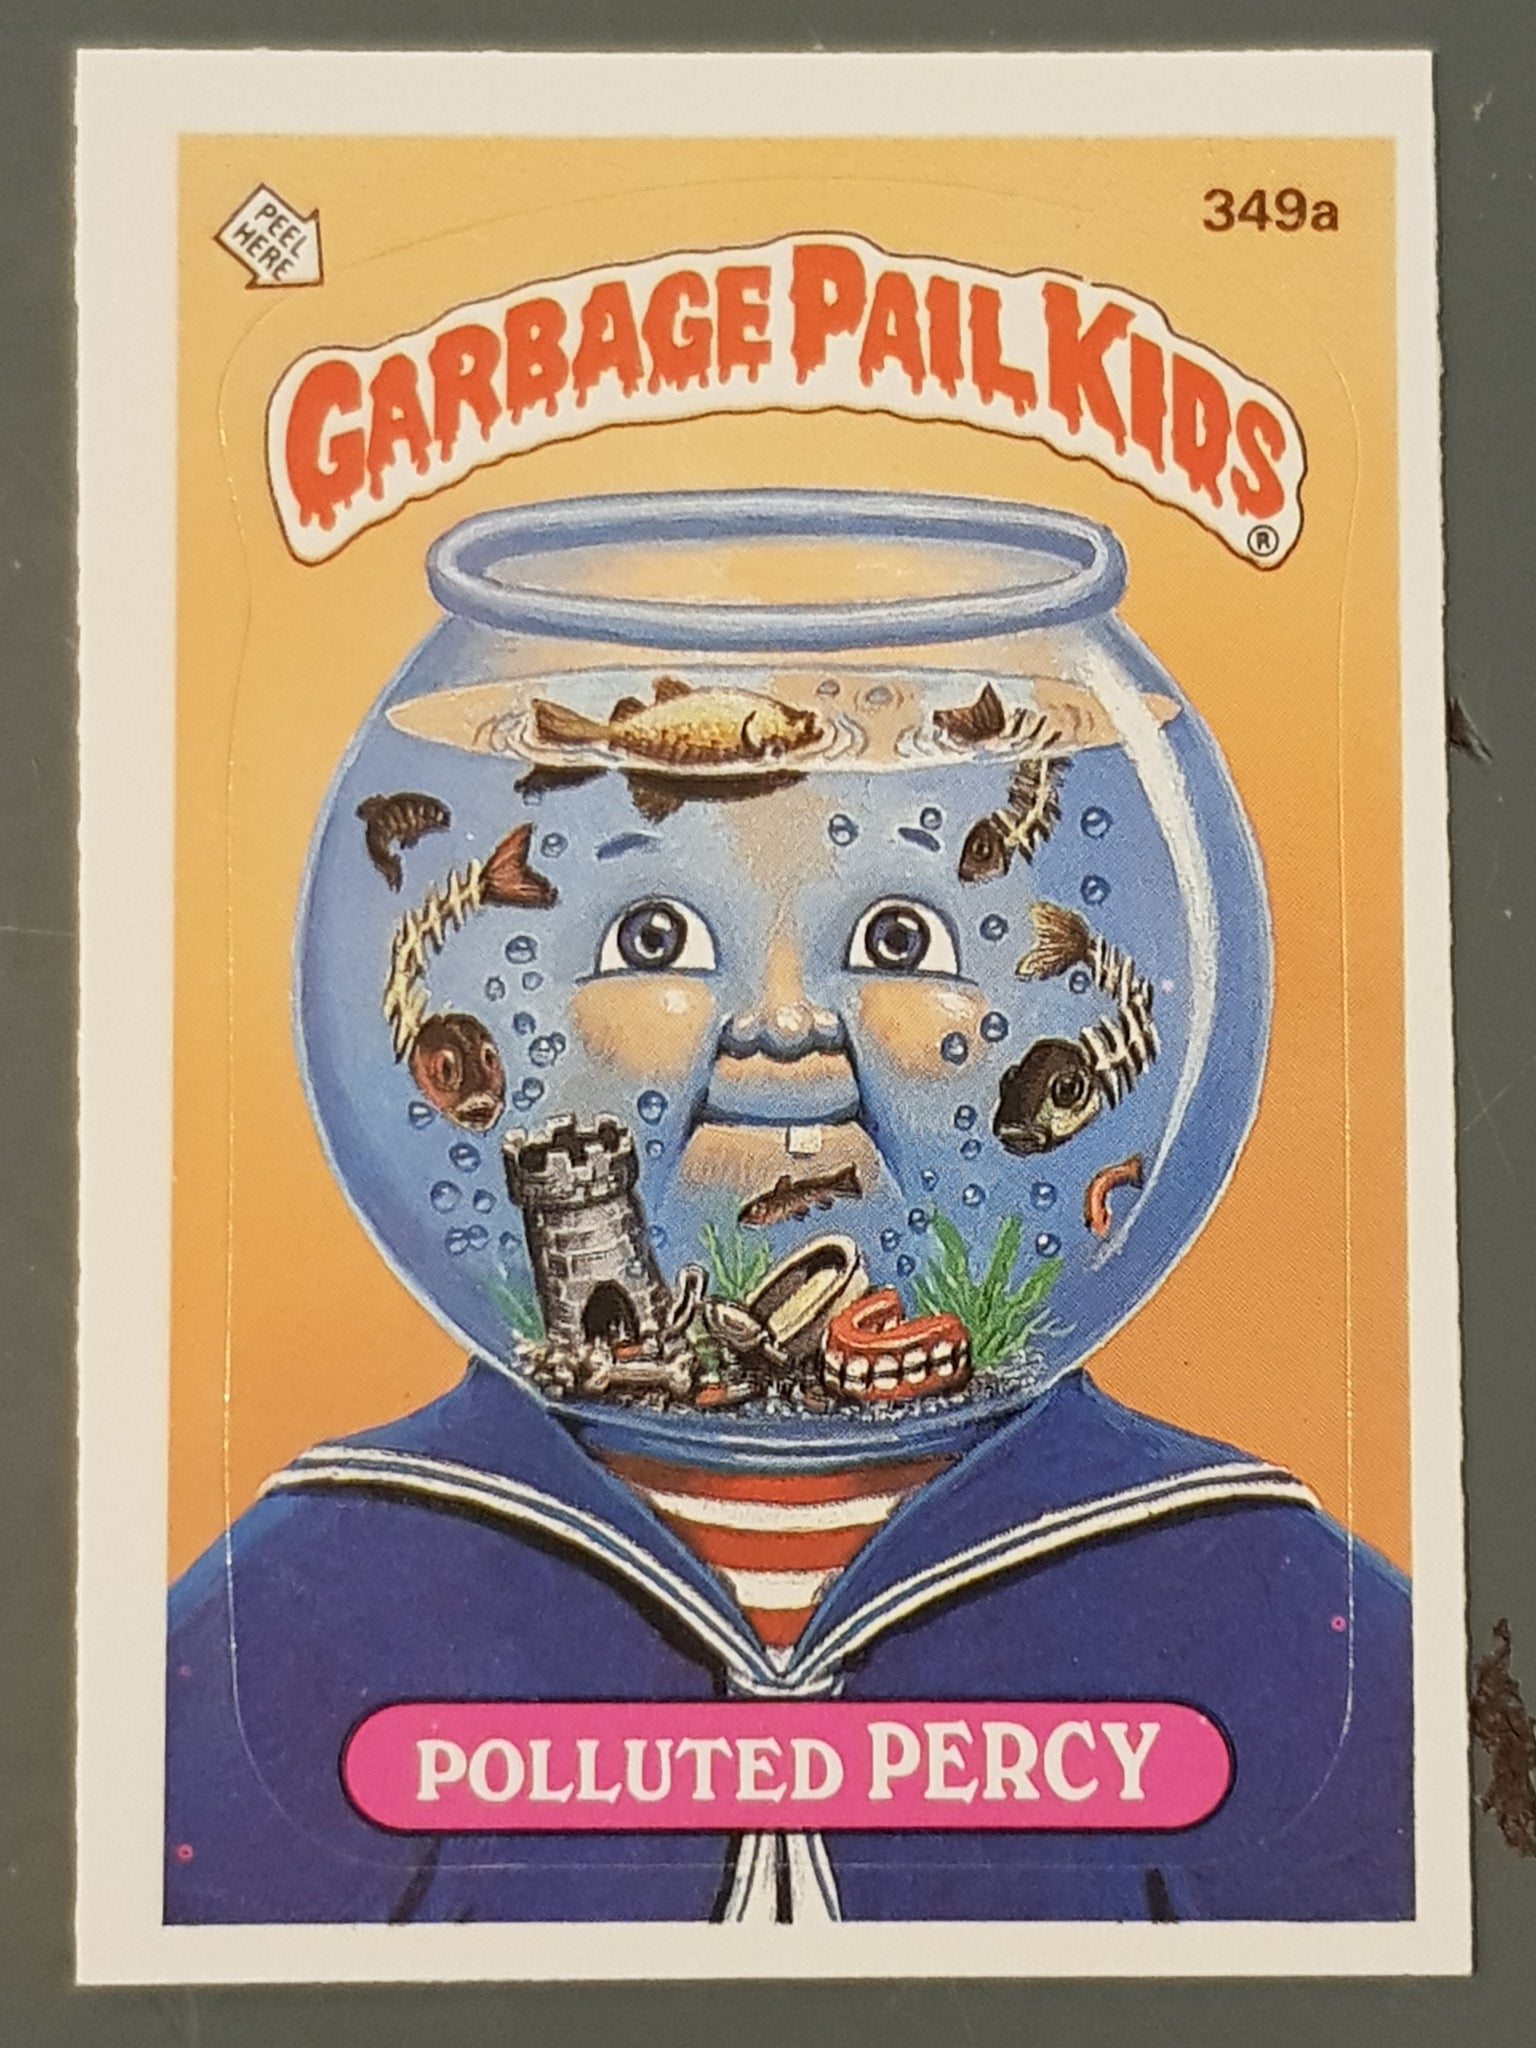 Garbage Pail Kids Original Series 9 #349a - Polluted Percy Sticker